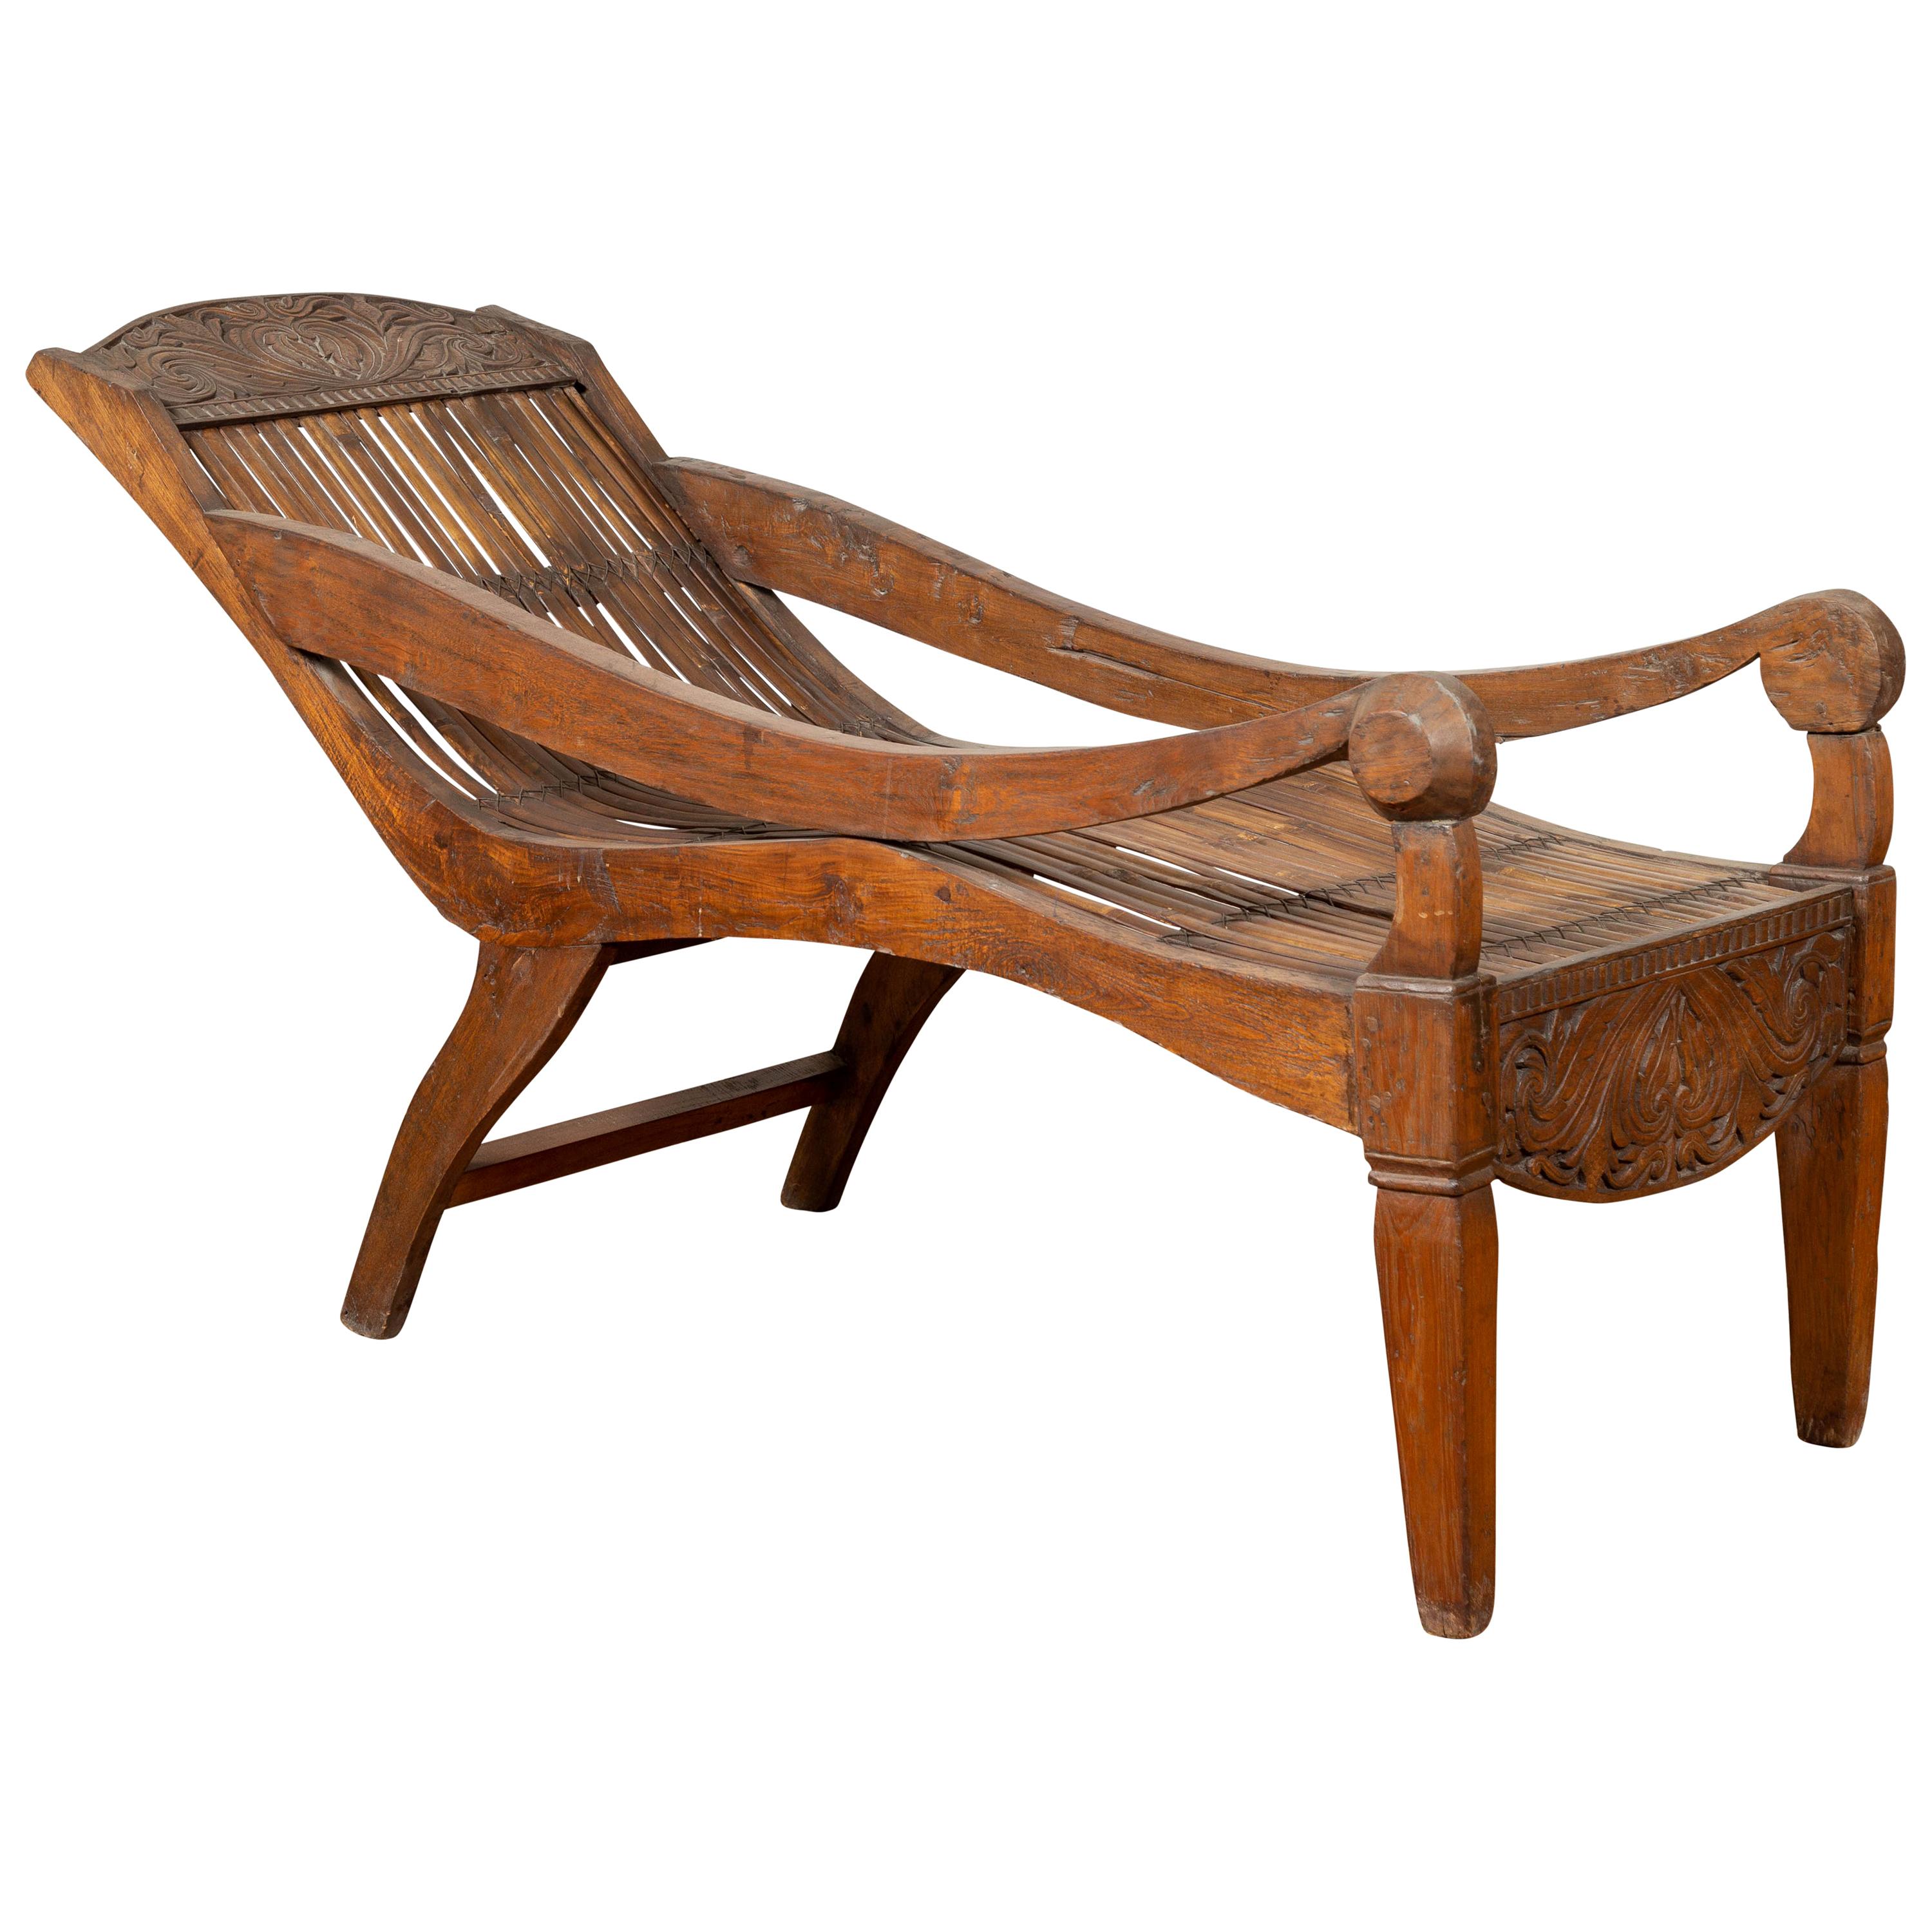 Antique Indonesian Reclining Plantation Chair with Bamboo Slats and Carved Décor For Sale